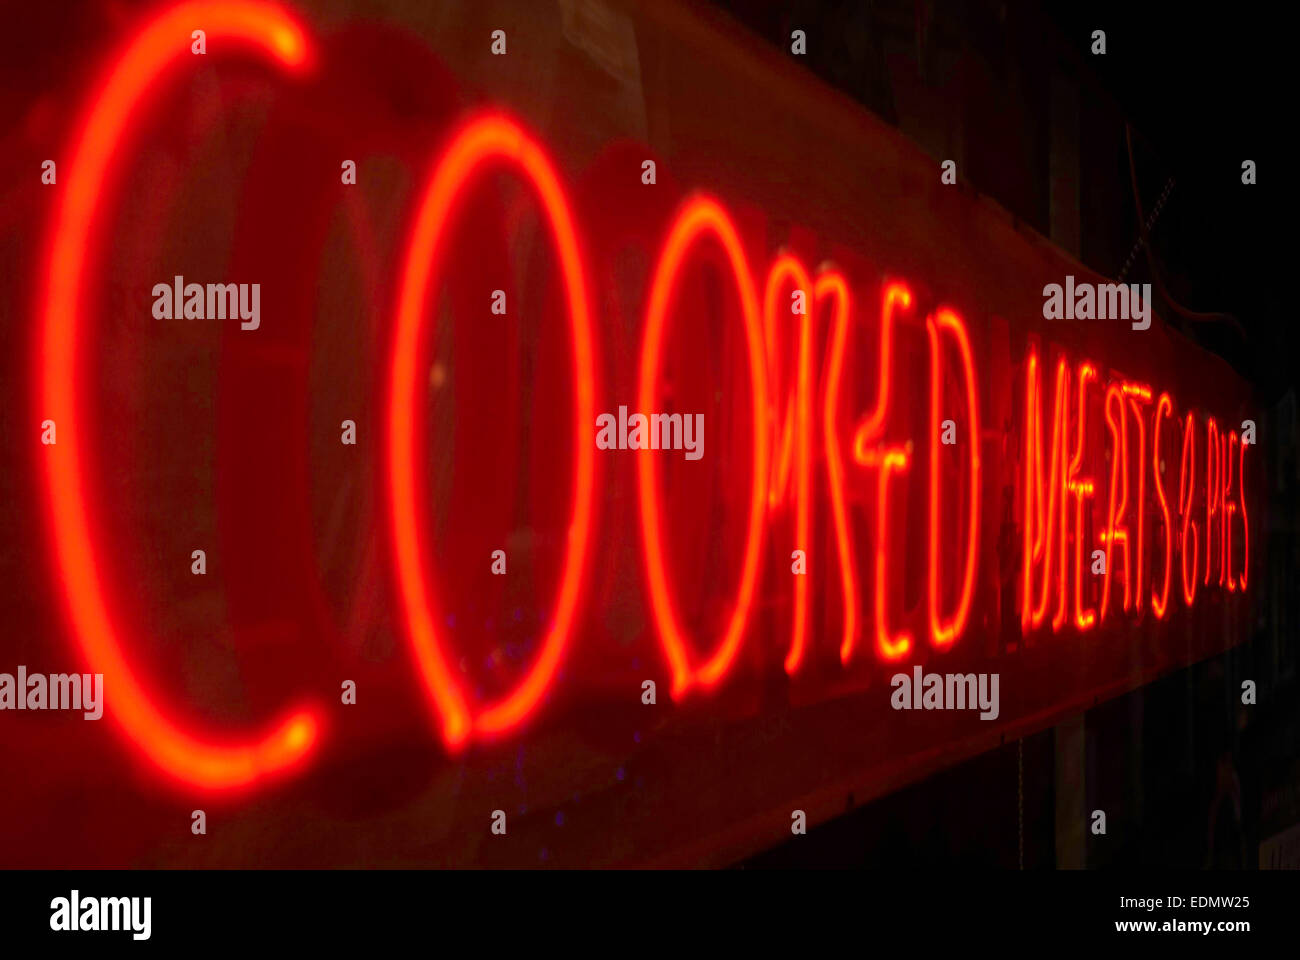 cooked meats and pies sign / neon food sign Stock Photo